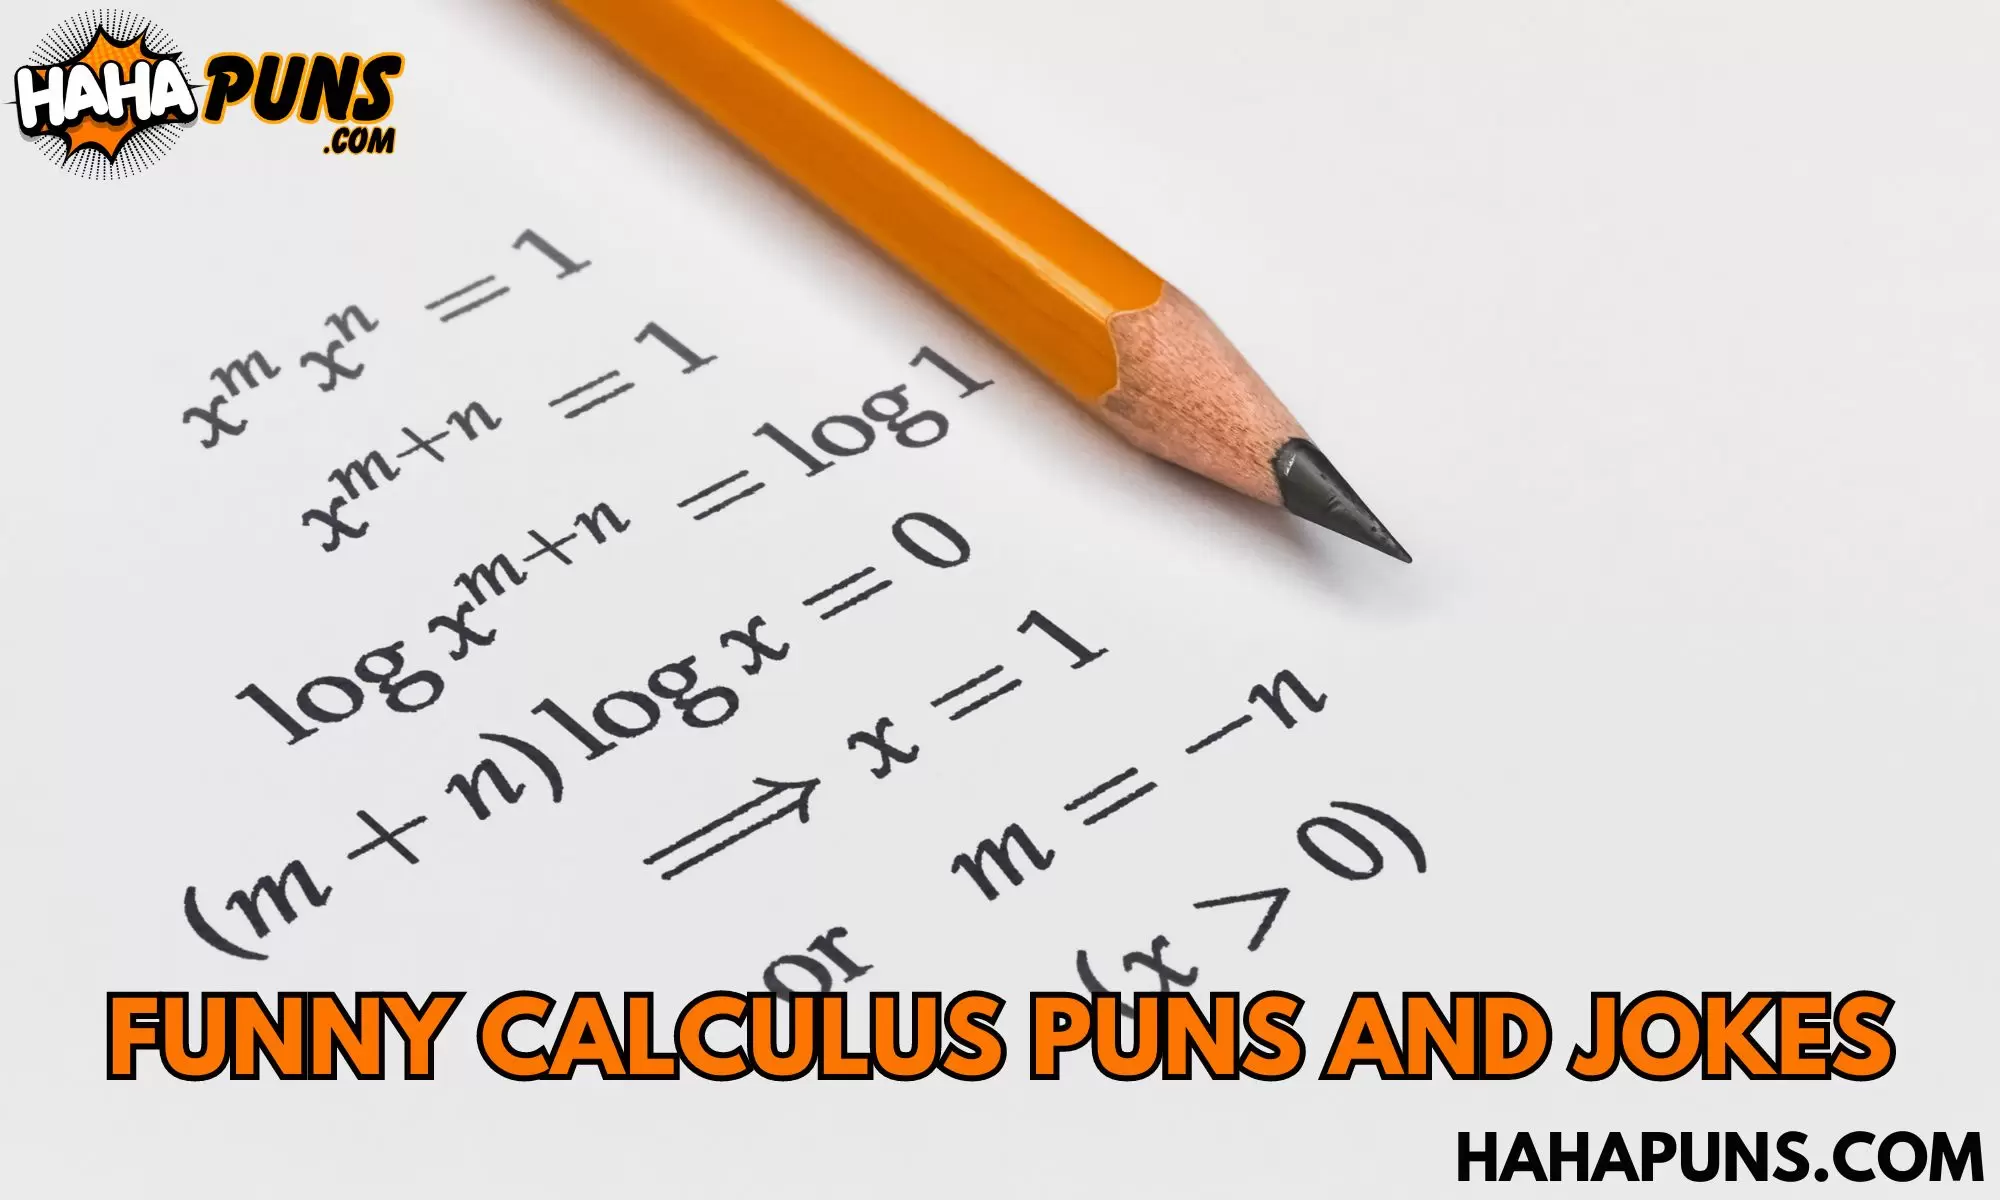 Funny Calculus Puns And Jokes